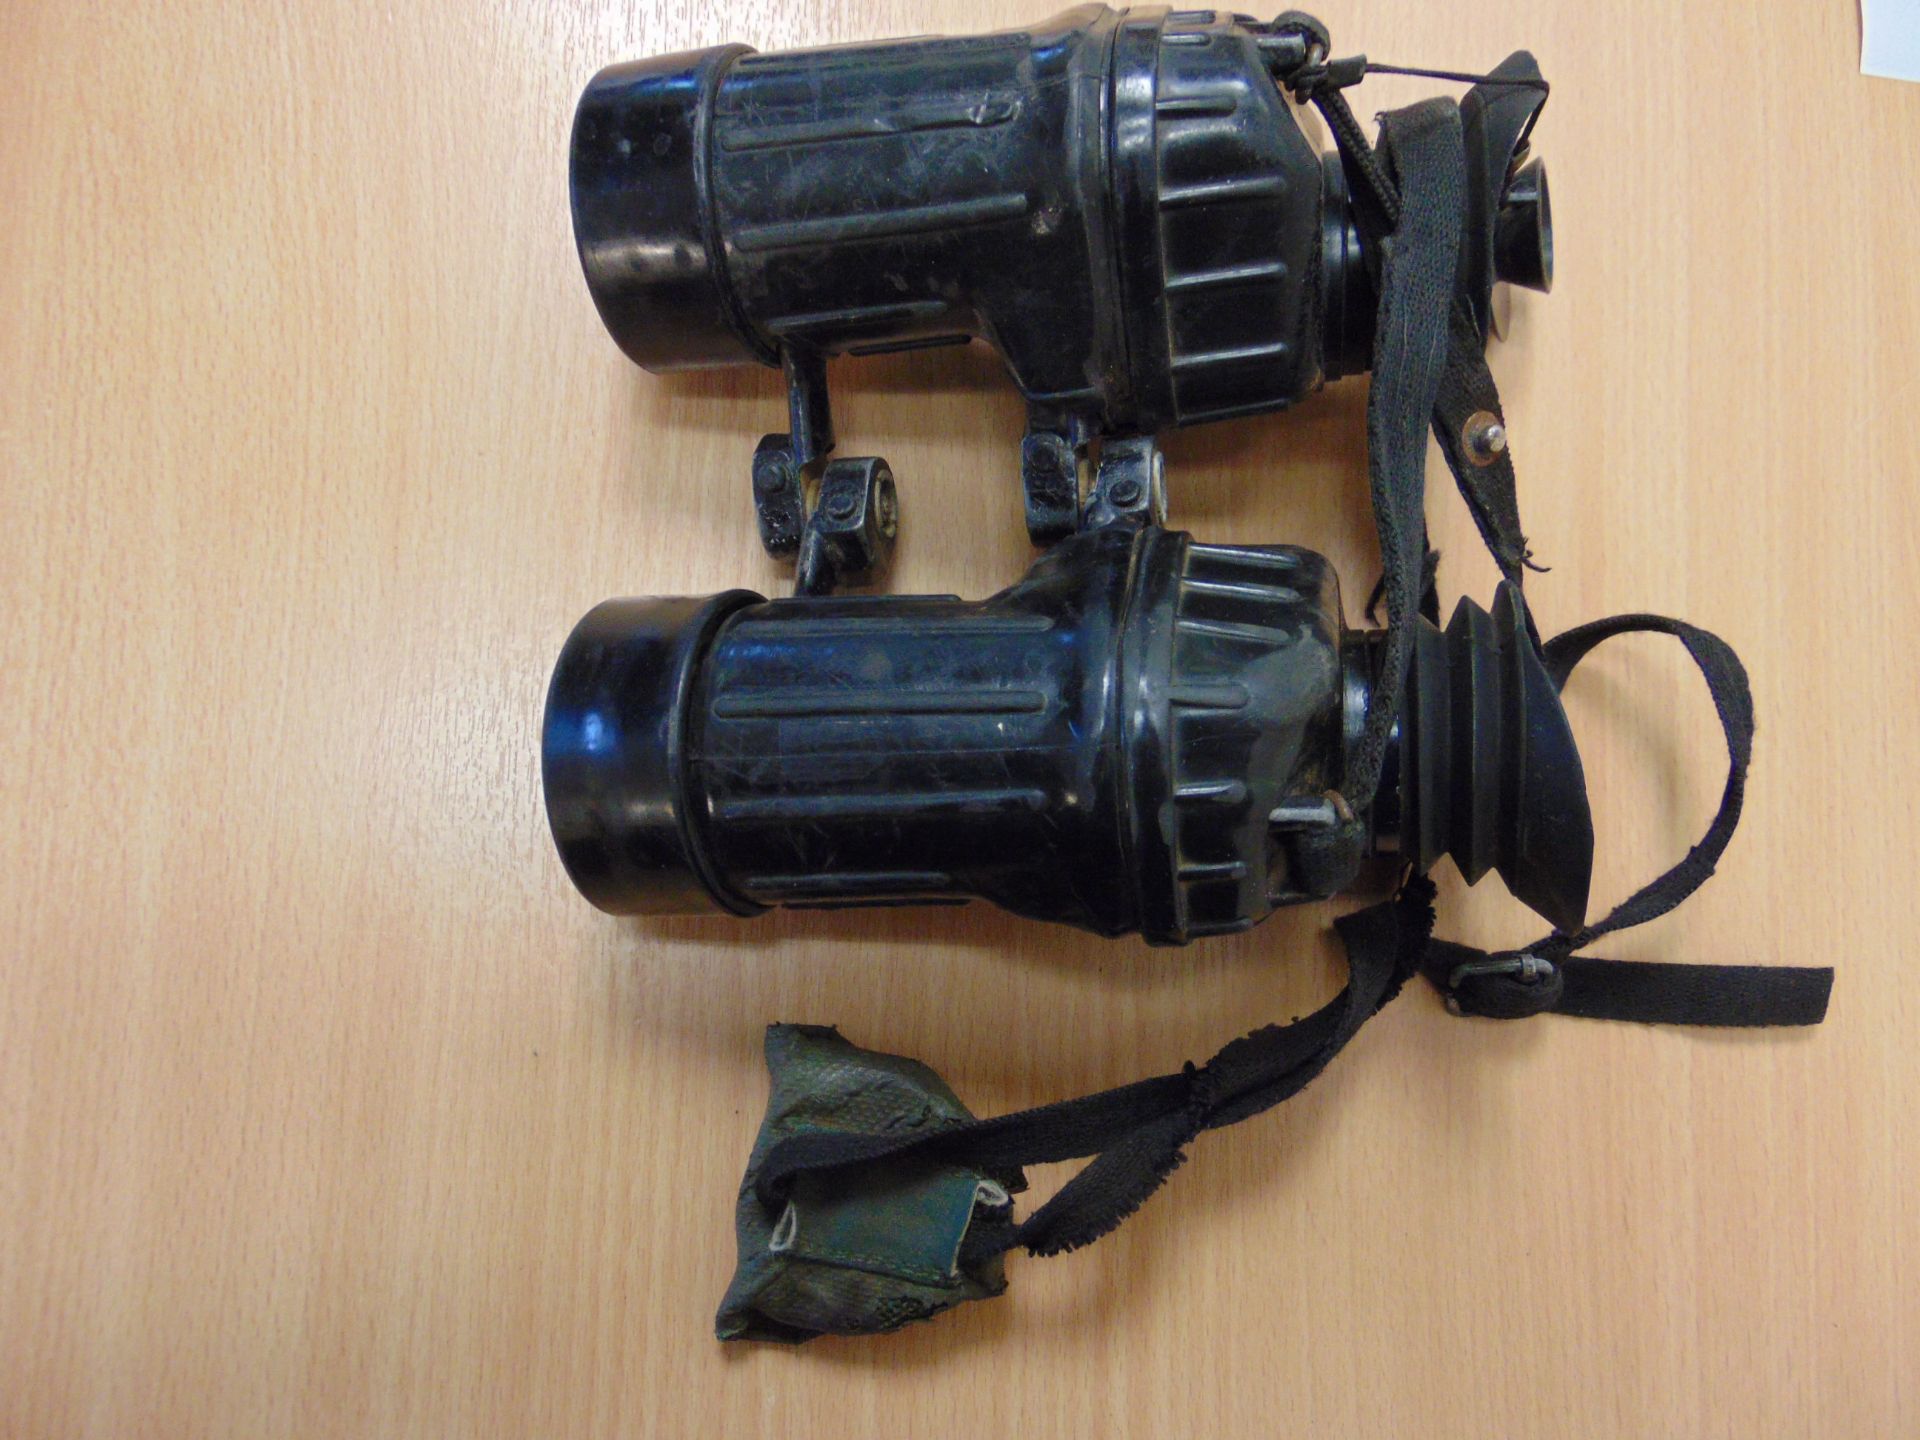 BRITISH ARMY L12A1 7X42 SELF FOCUSING BINOCULARS WITH FILTERS - Image 3 of 5